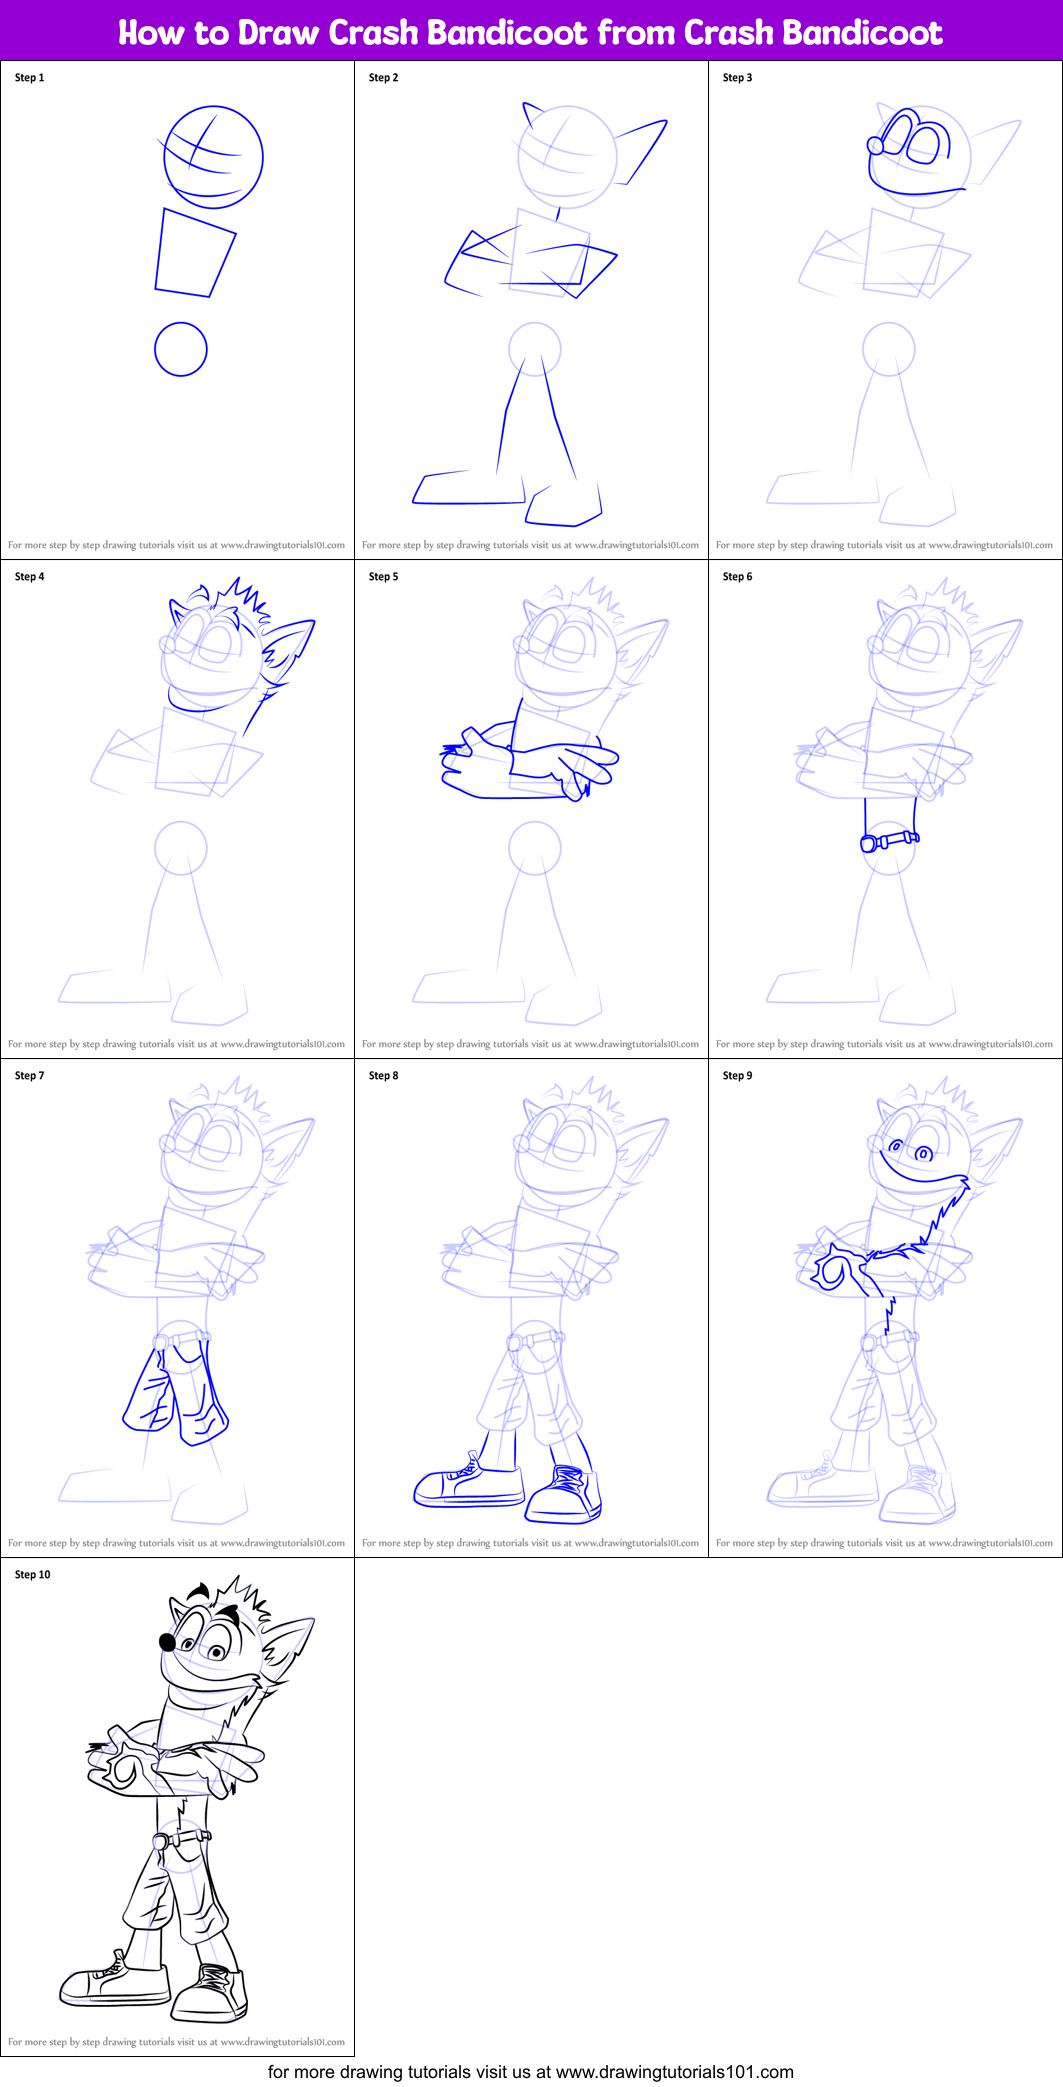 How to Draw Crash Bandicoot from Crash Bandicoot printable step by step